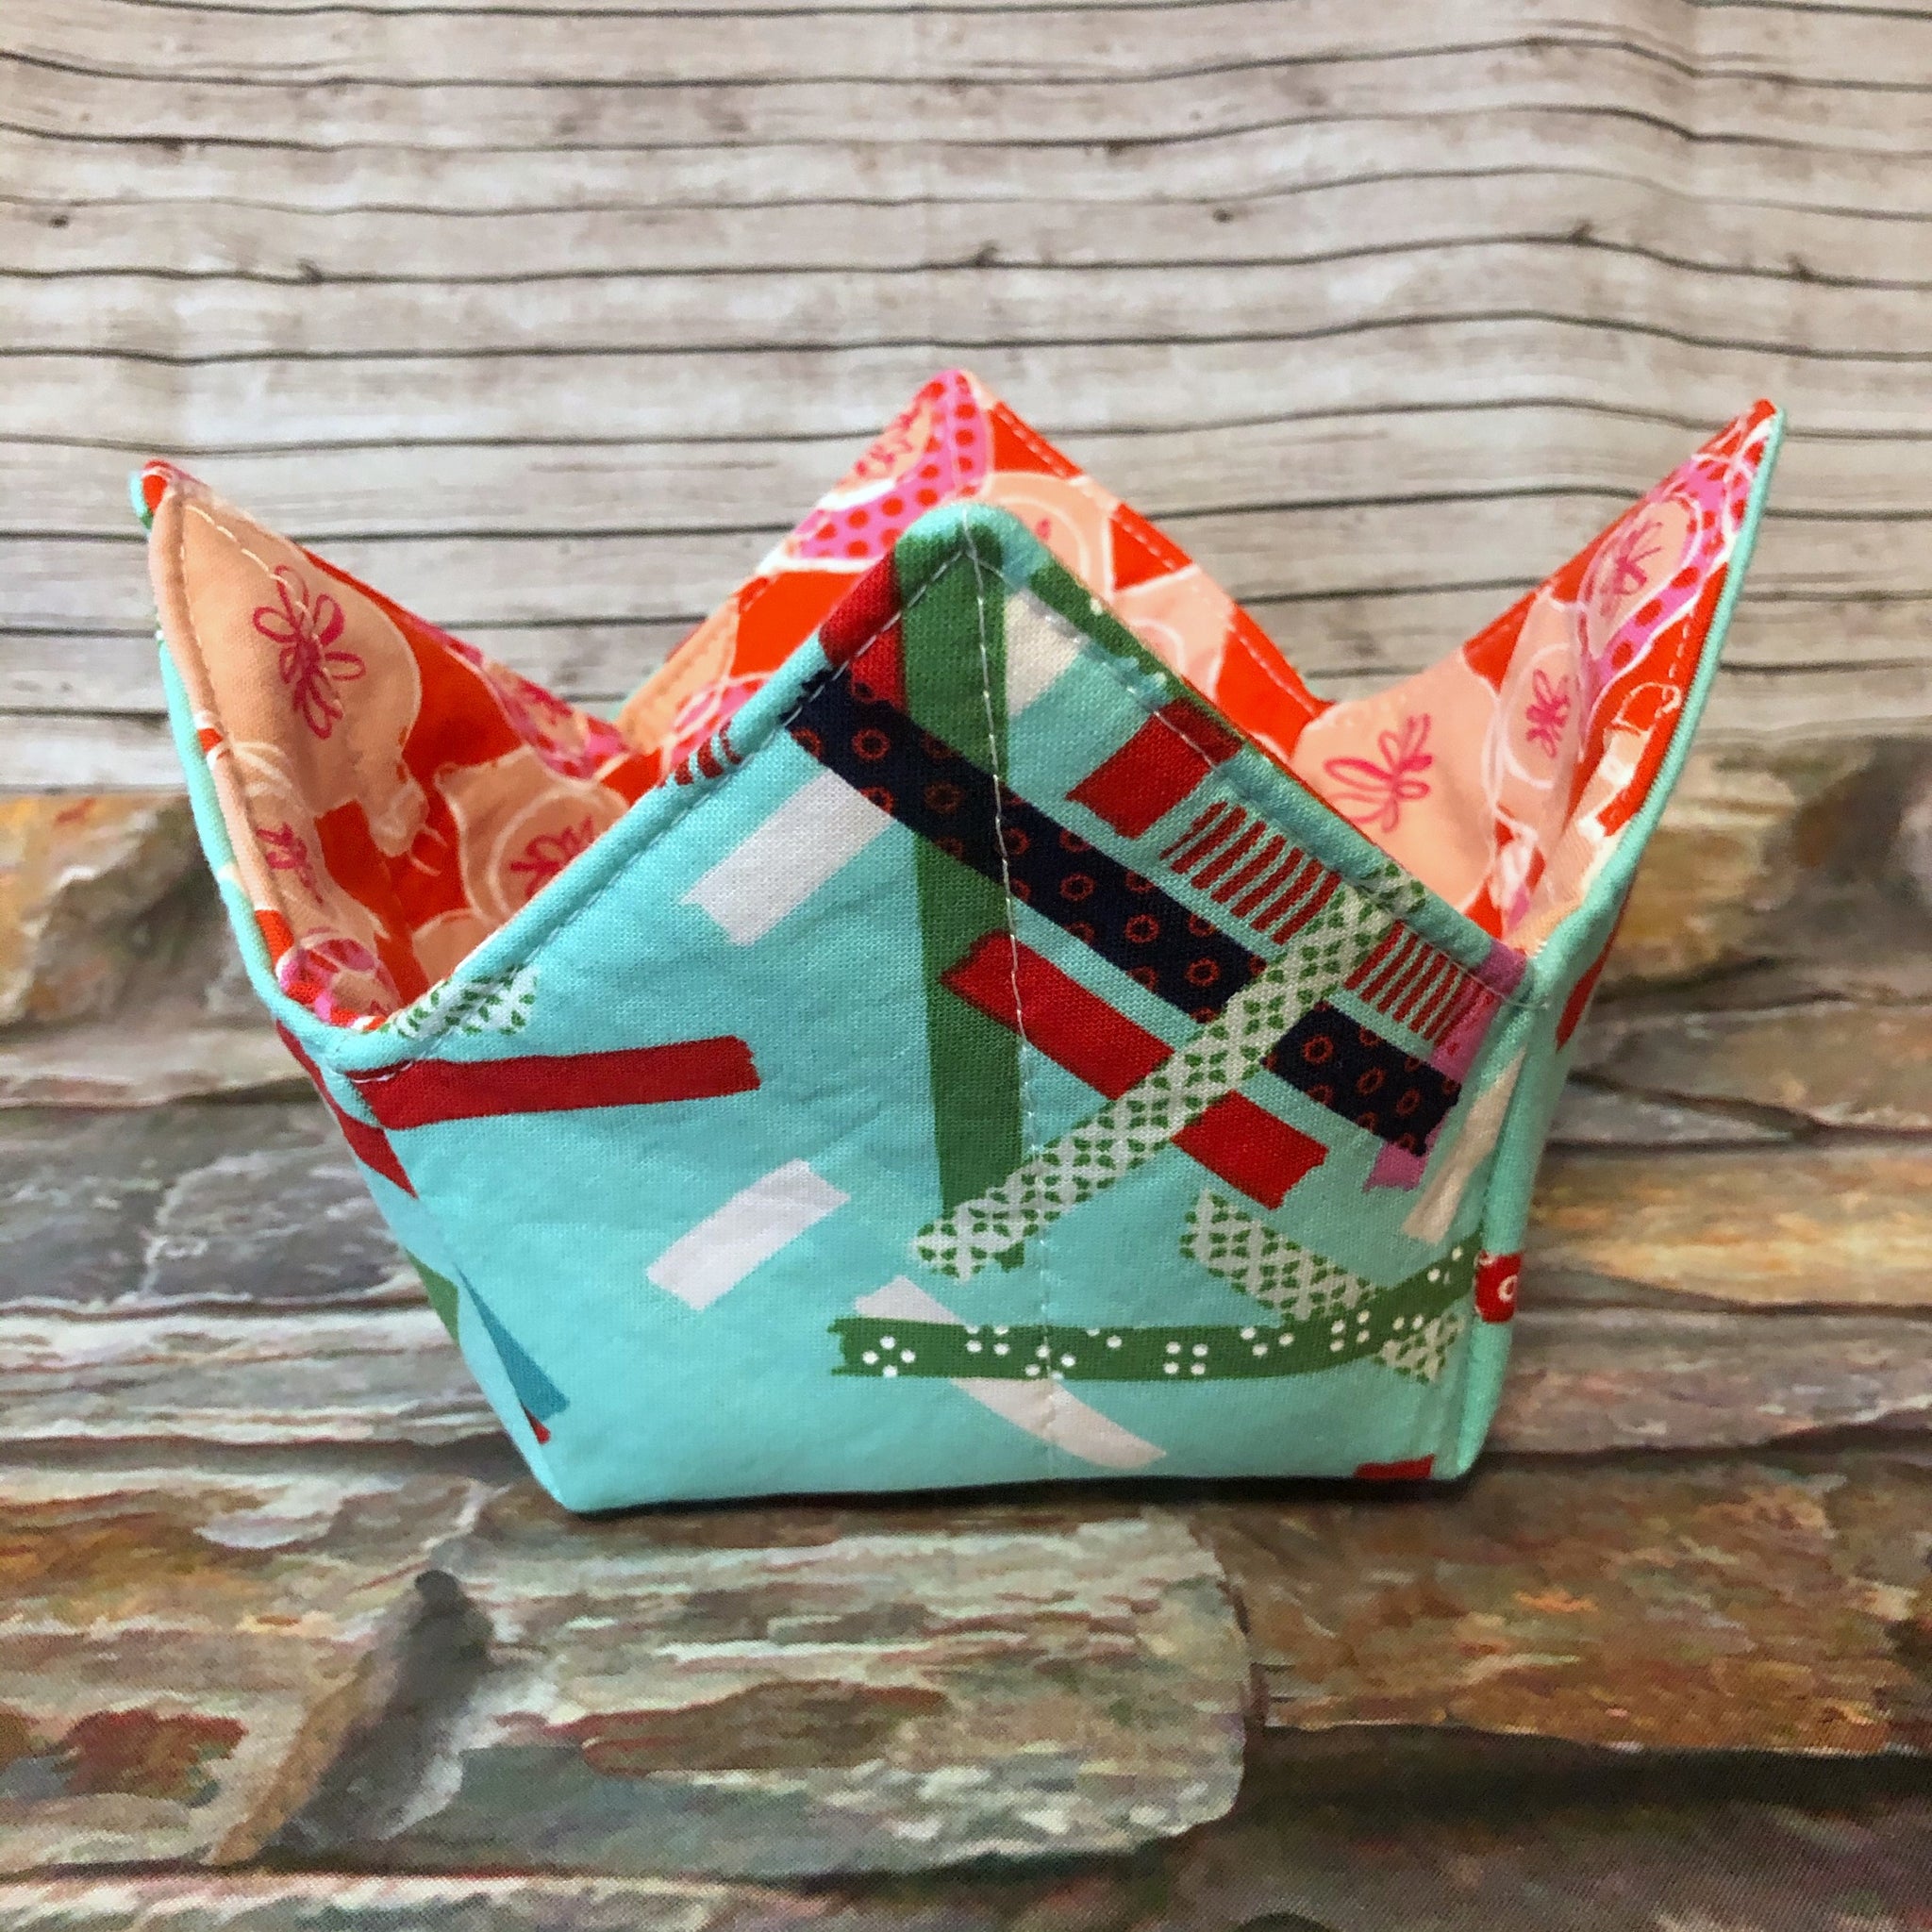 “Yarn Bowl” Project Bags